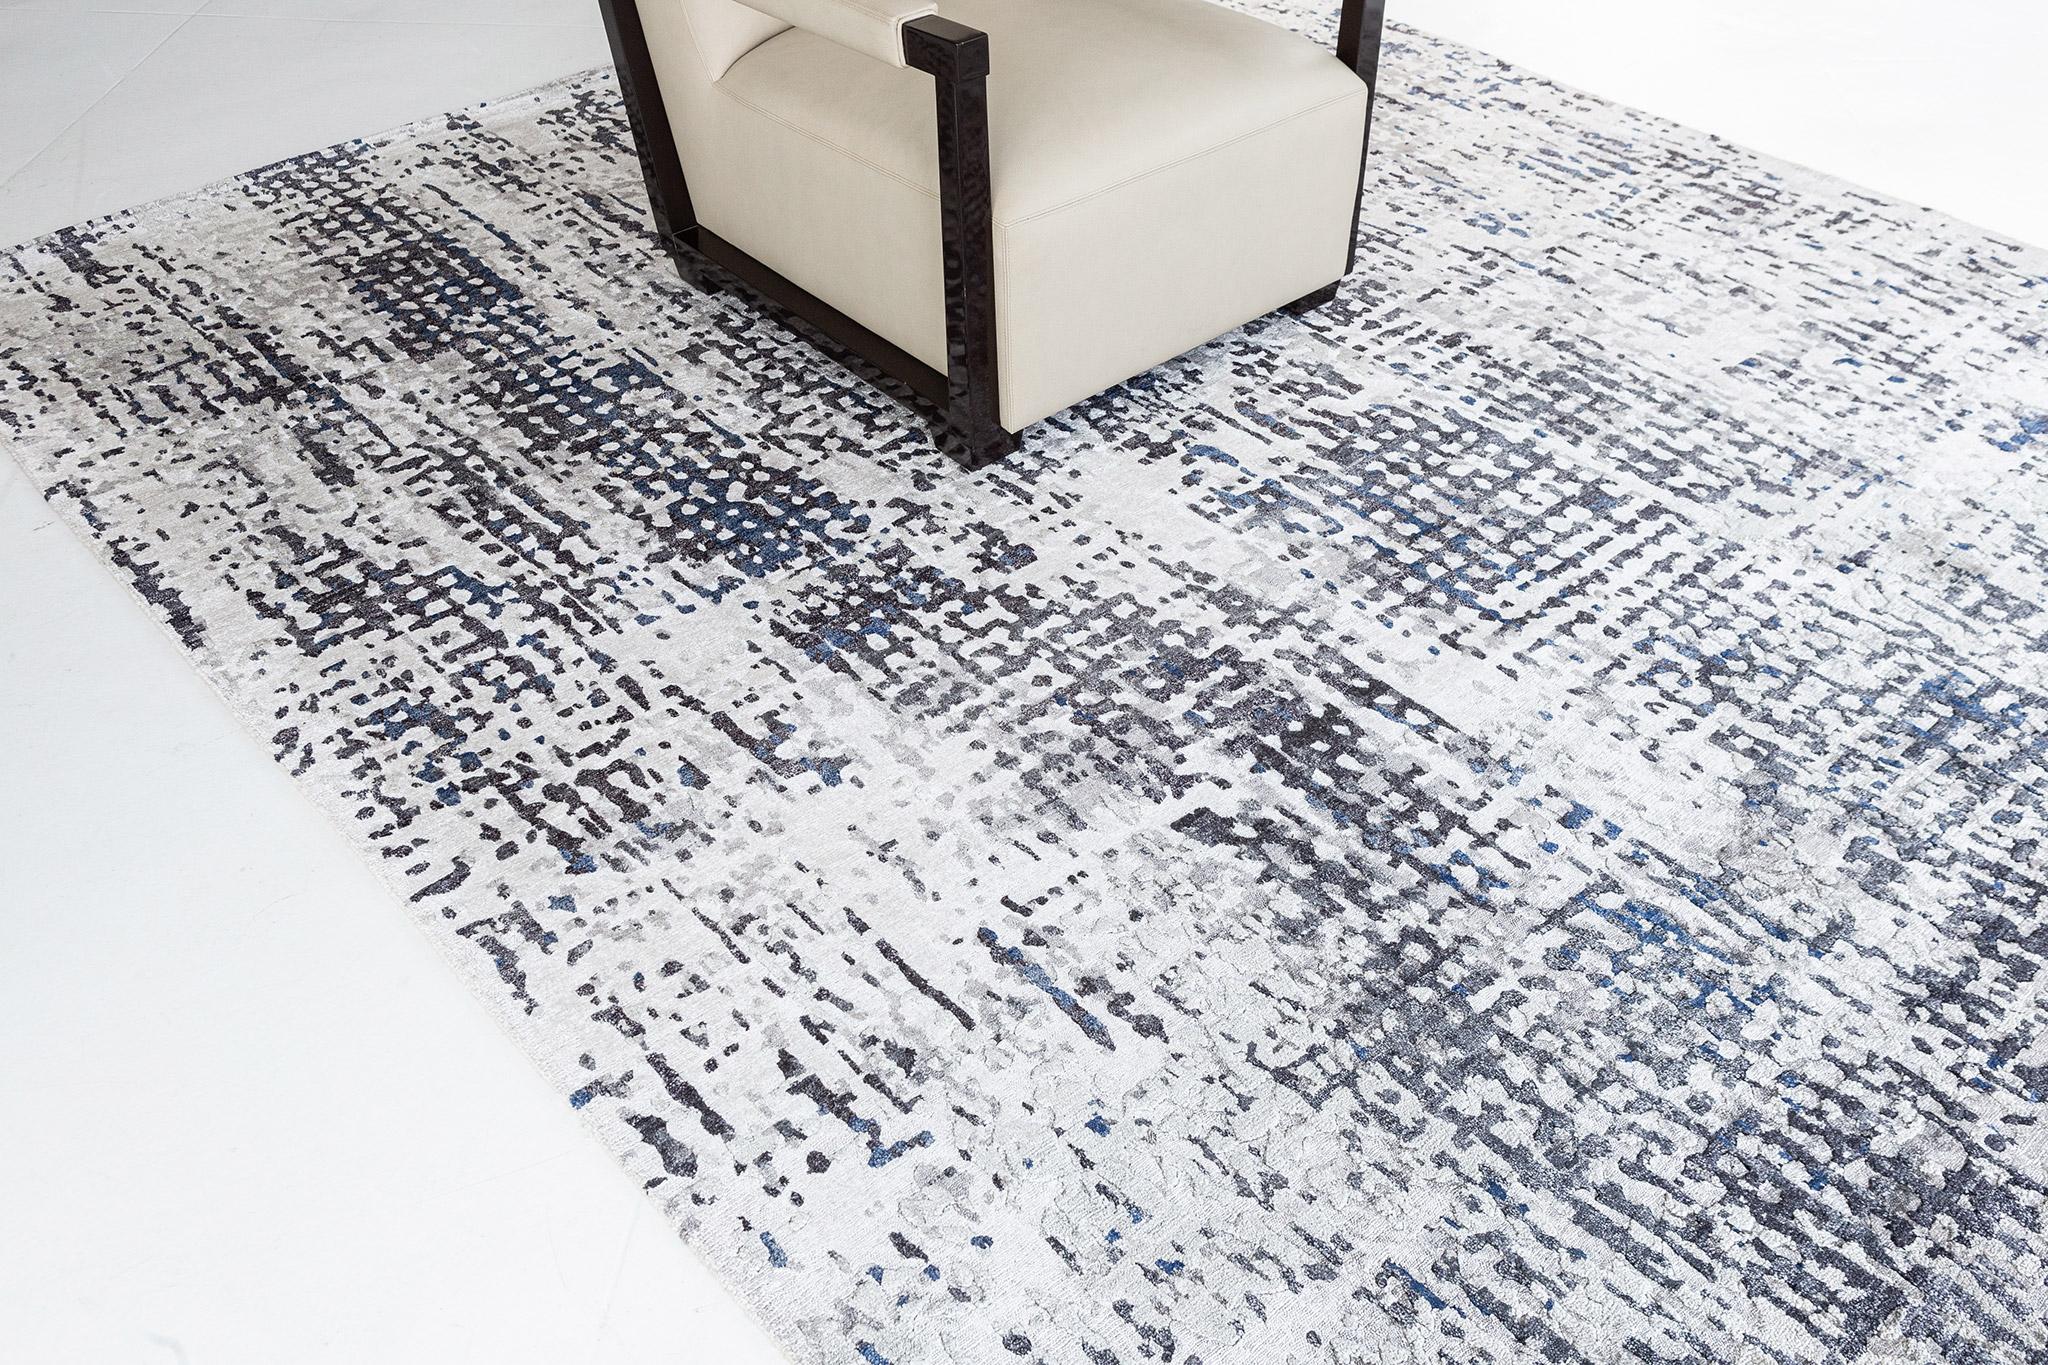 This magical Modern Design Bamboo Silk rug features the horizontal and vertical strokes, with its playful combination of charcoal and gray dominant colors. It is just as trendy and refined at the same time, perfect for any connoisseur of a fine